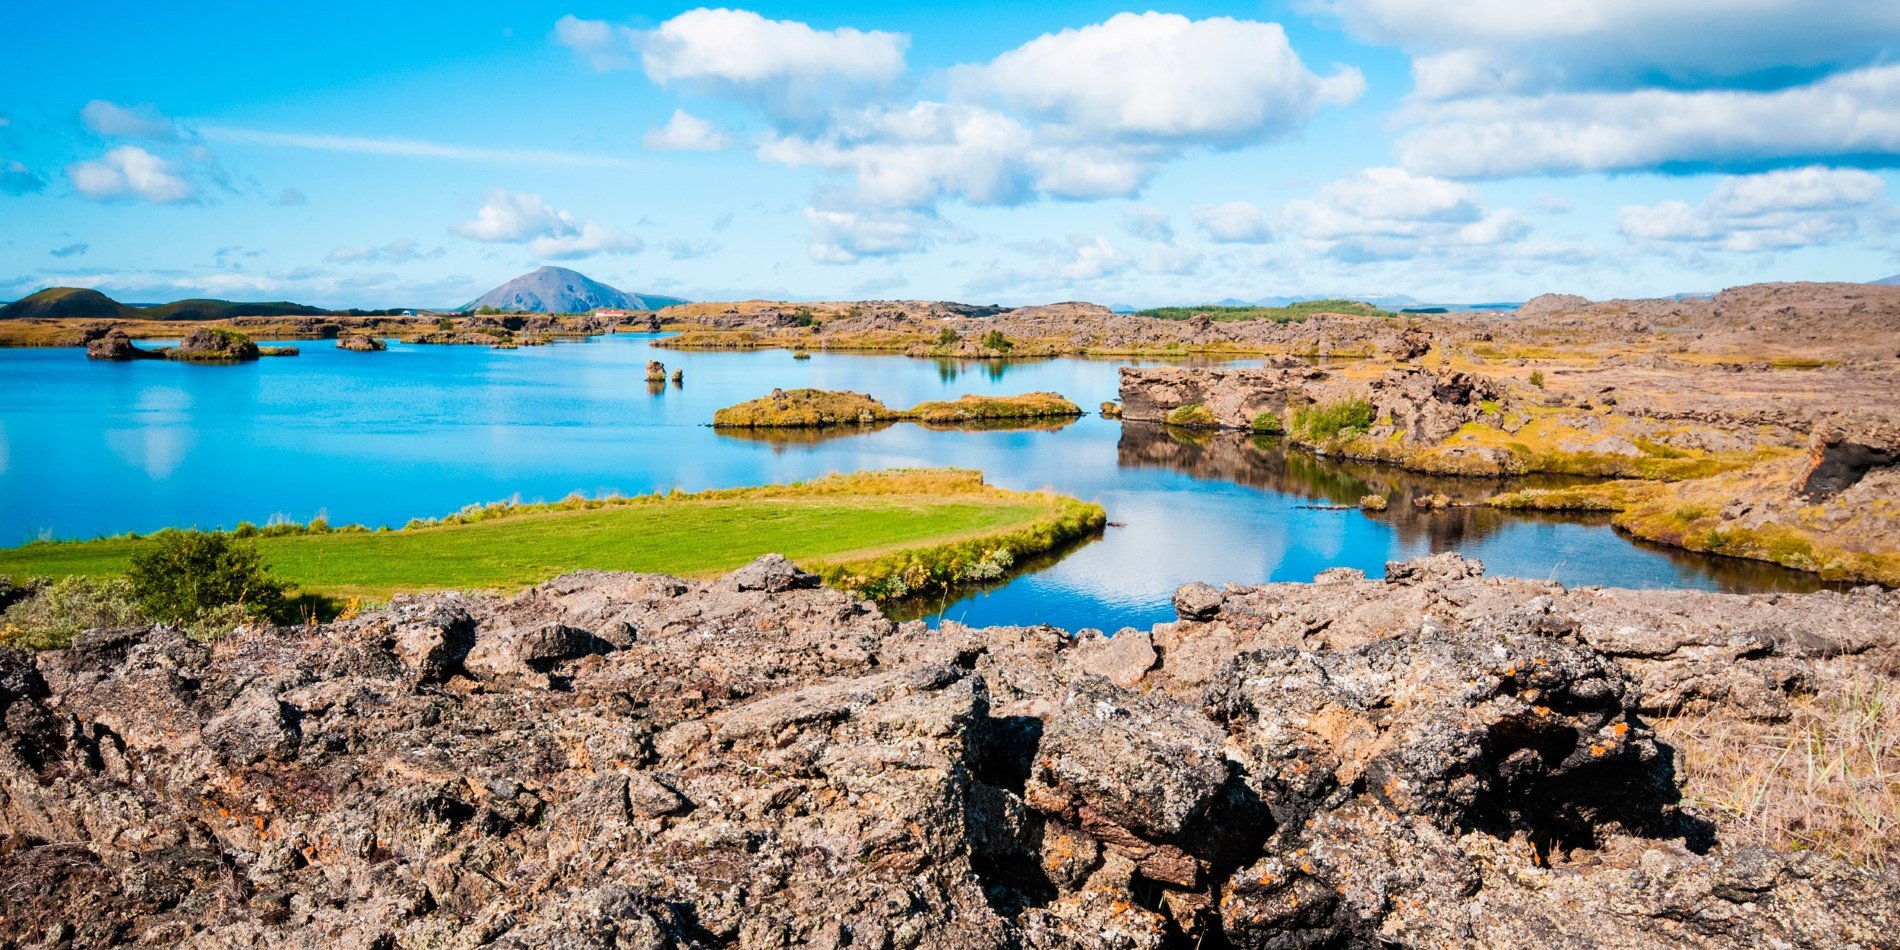 Lake Mývatn is one of Europe’s greatest natural treasures